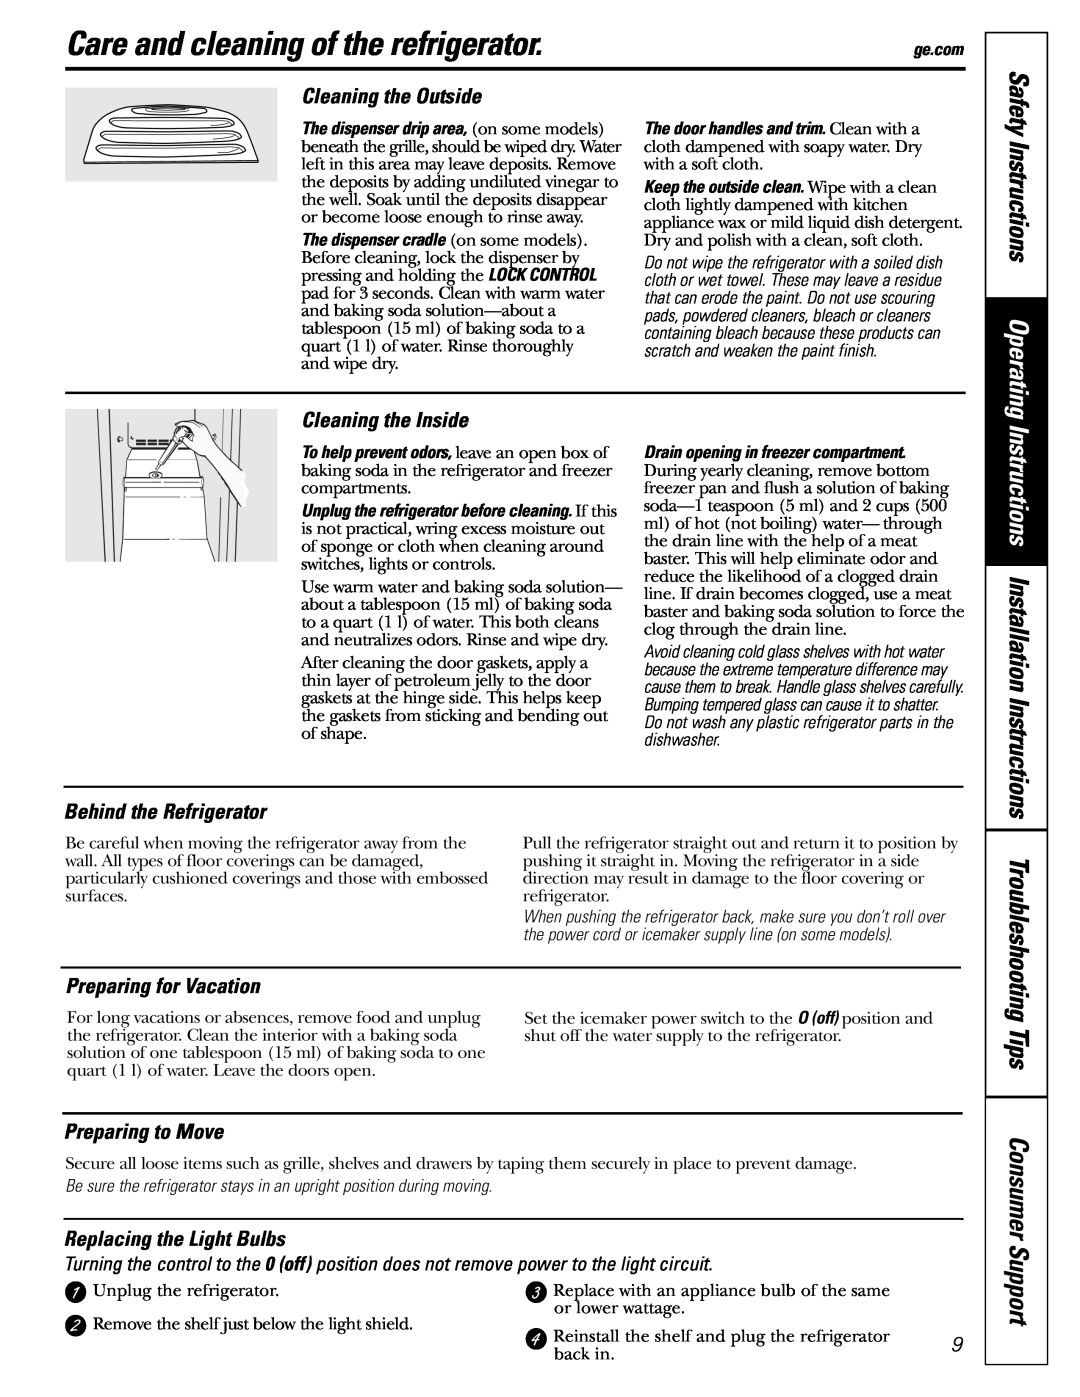 GE 20 Care and cleaning of the refrigerator, Safety Instructions Operating, Instructions Installation Instructions 